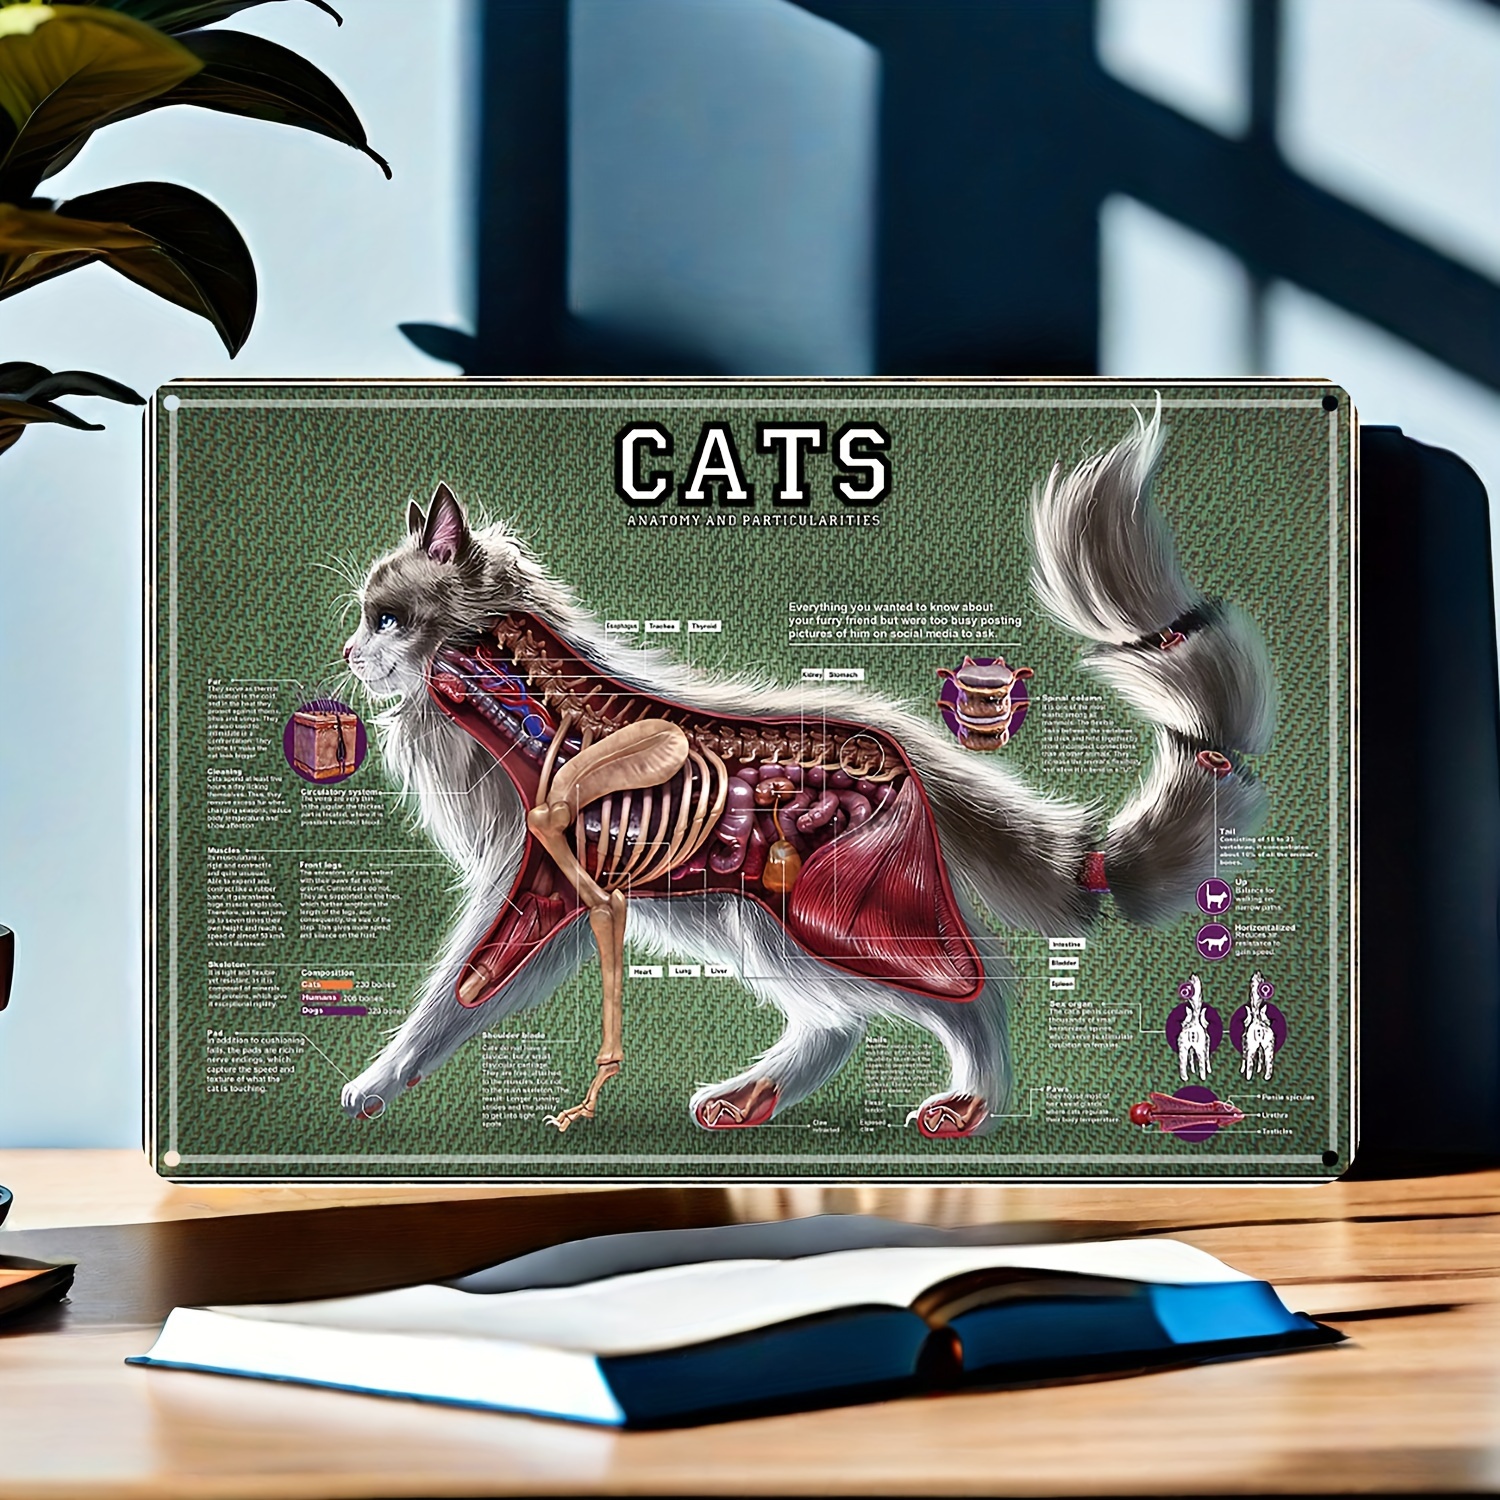 

Cats Veterinary Anatomy Metal Tin Sign Wall Decor, Waterproof And Pre-drilled For Easy Hanging, Vintage Art Poster For Home, Garden, Bedroom, Bar, Bathroom, Party, Music Hall - 7.87x11.81 Inches